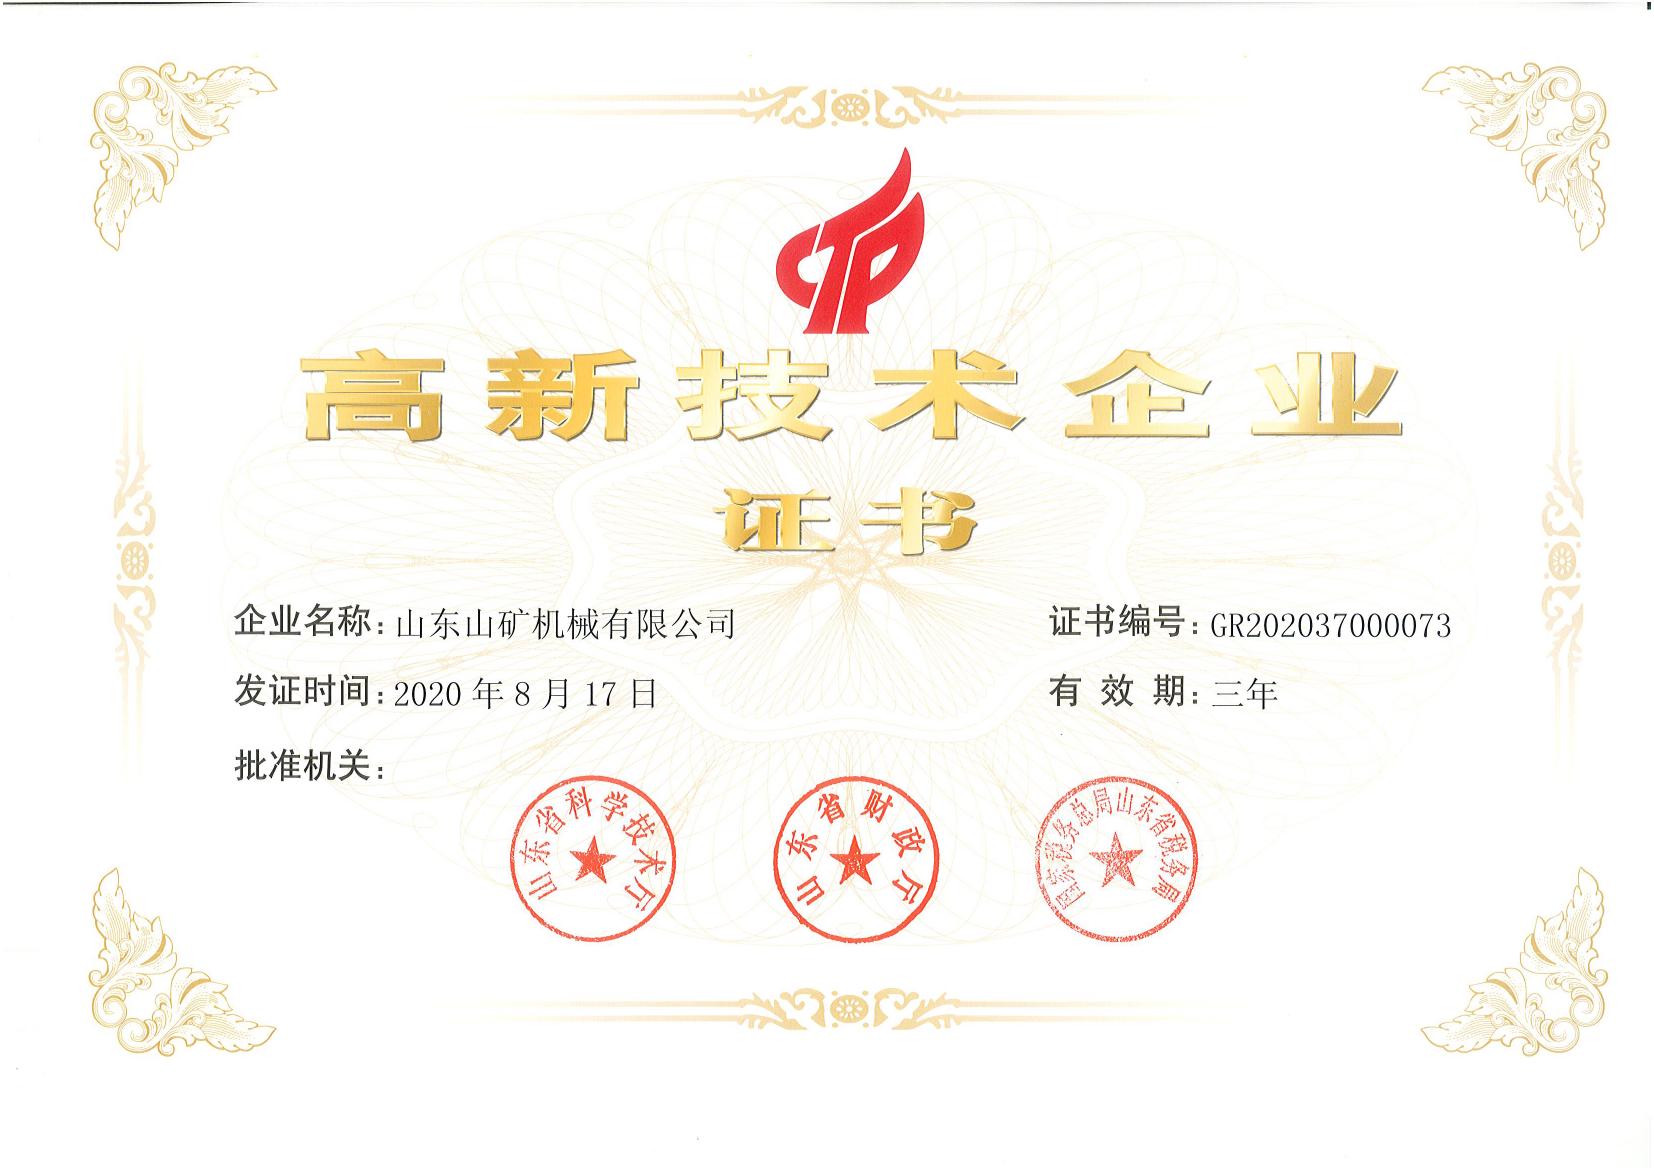 Certificate of 2020 High and new technology enterprise